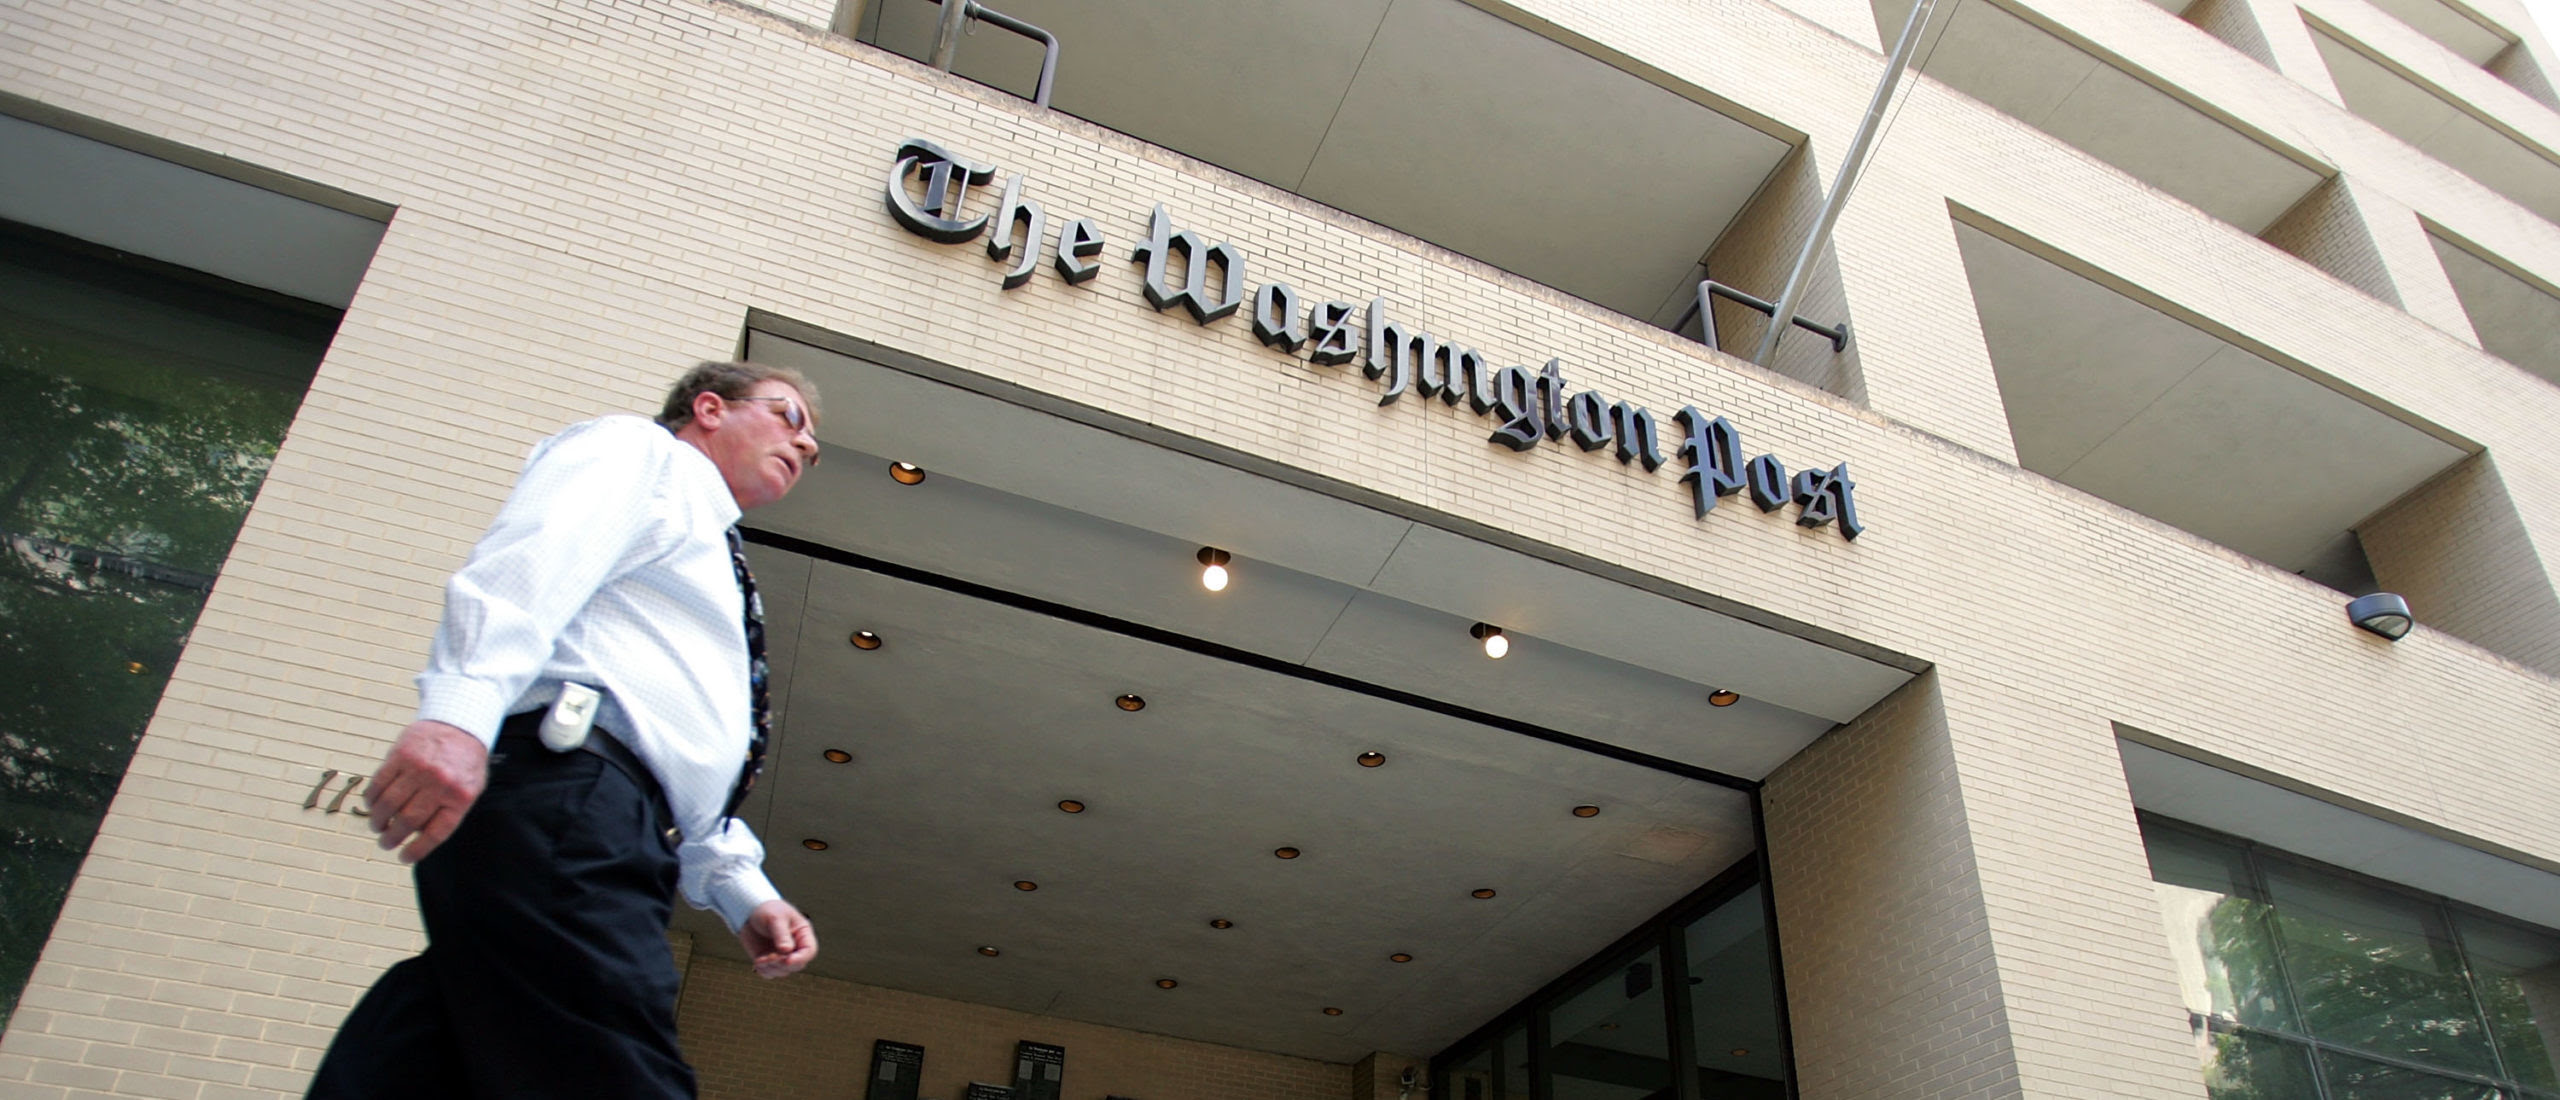 WaPo Slammed For Saying Waukesha Massacre Was ‘Caused By A SUV’